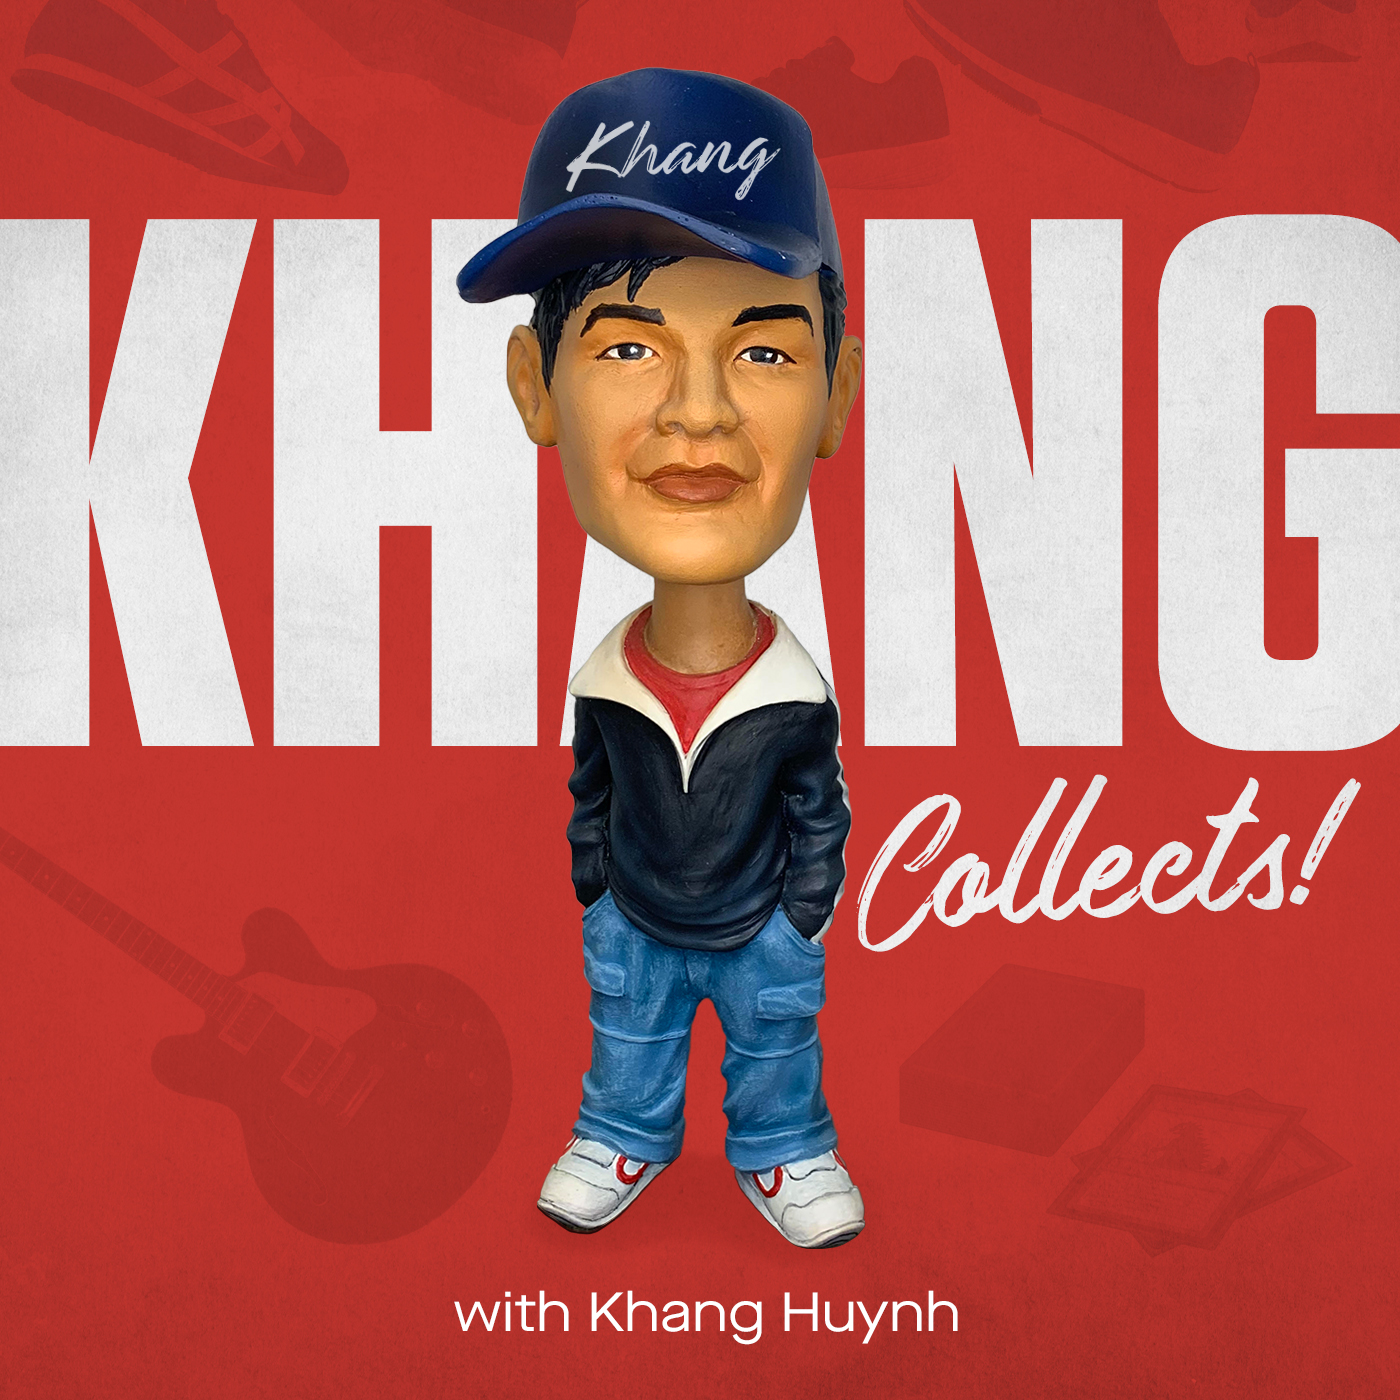 KHANG Collects!